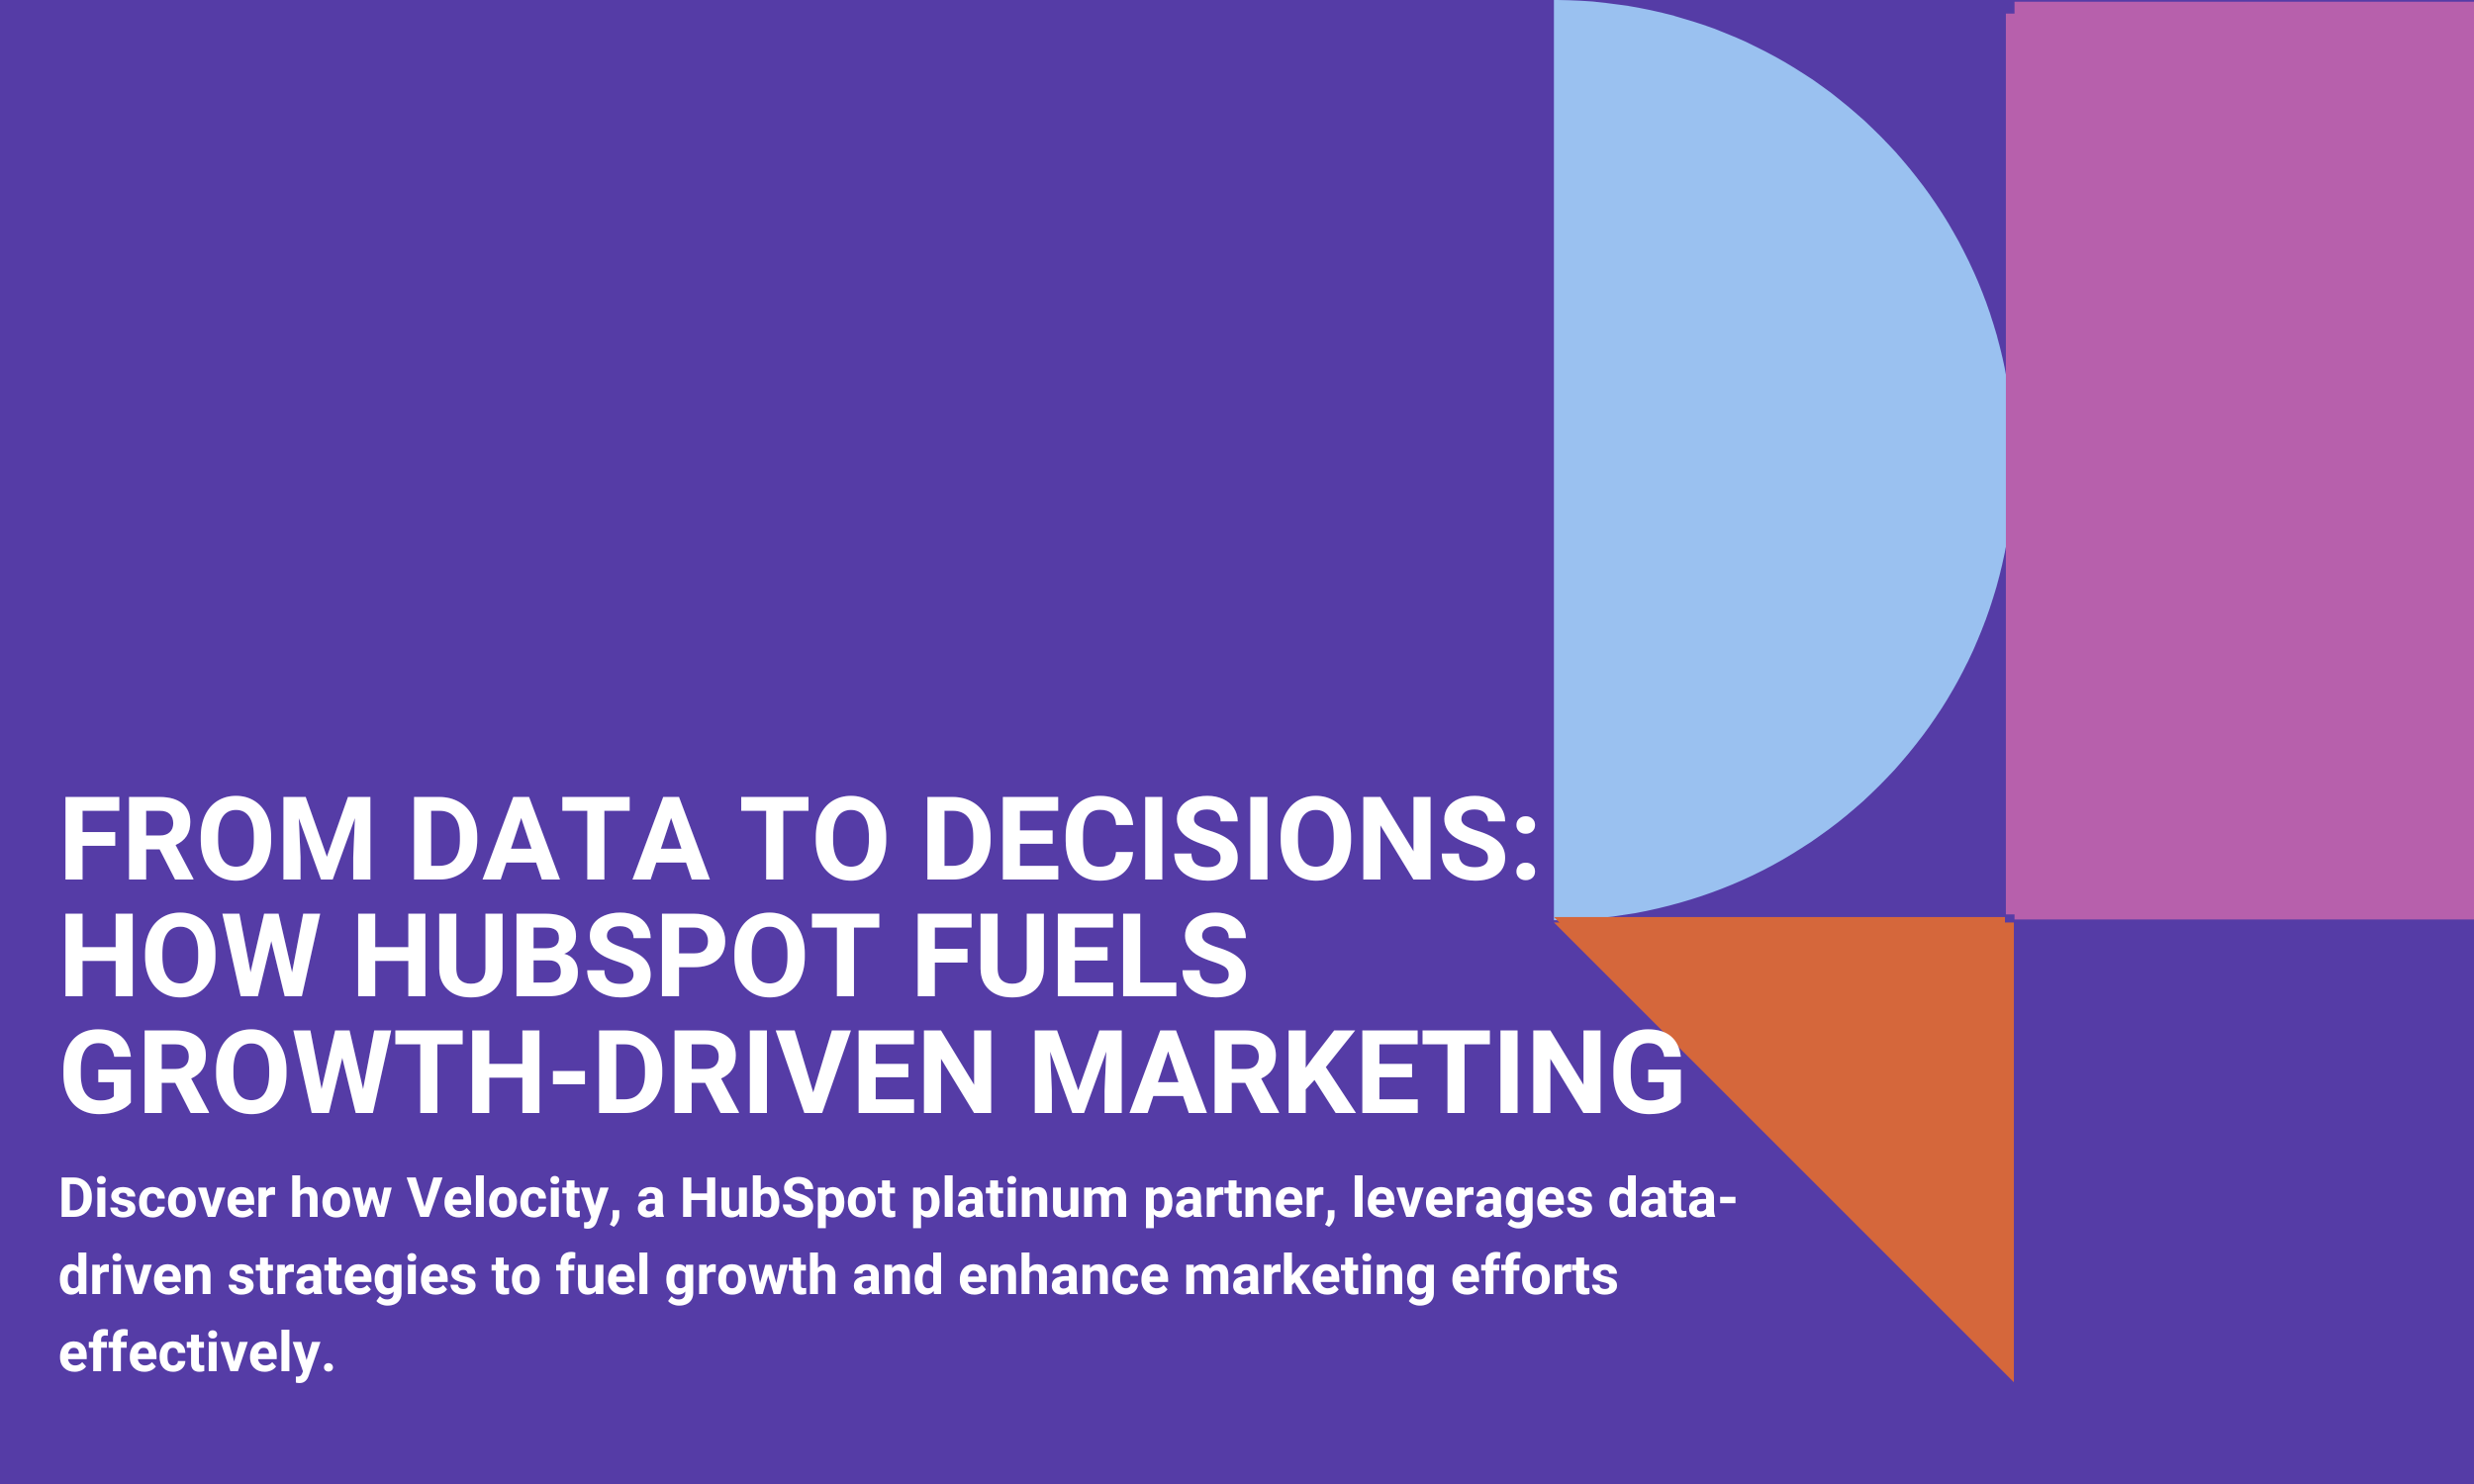 From Data to Decisions: How HubSpot Fuels Growth-Driven Marketing